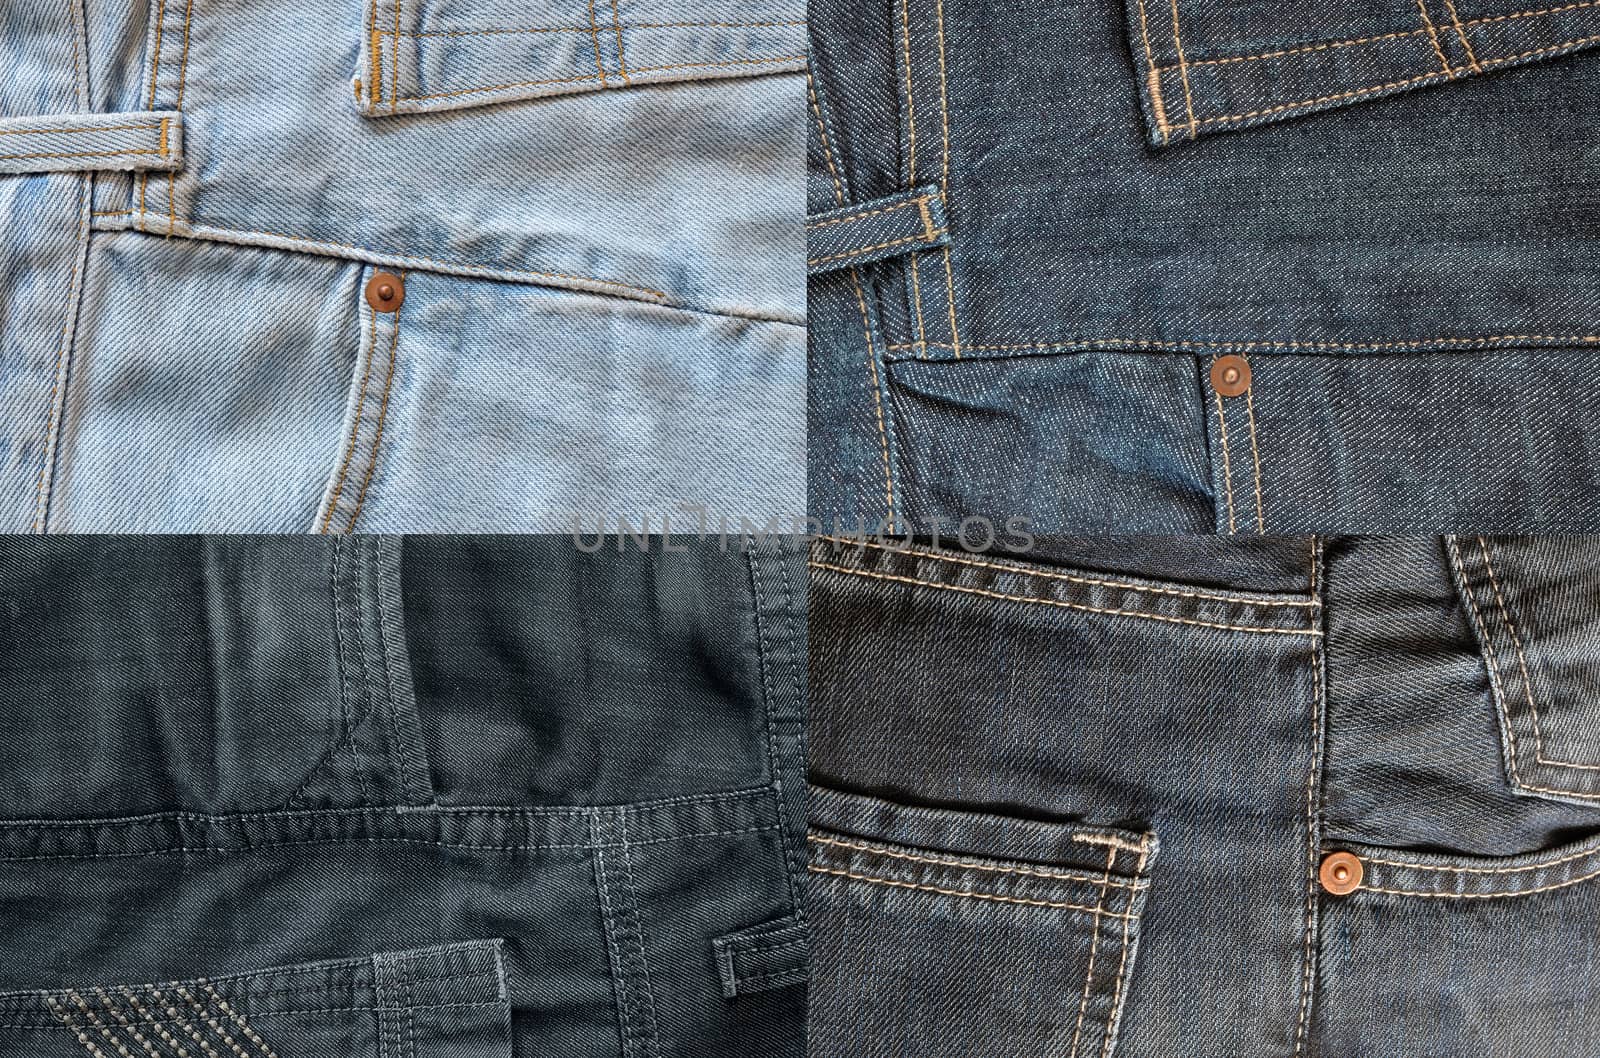 Four kind of jeans